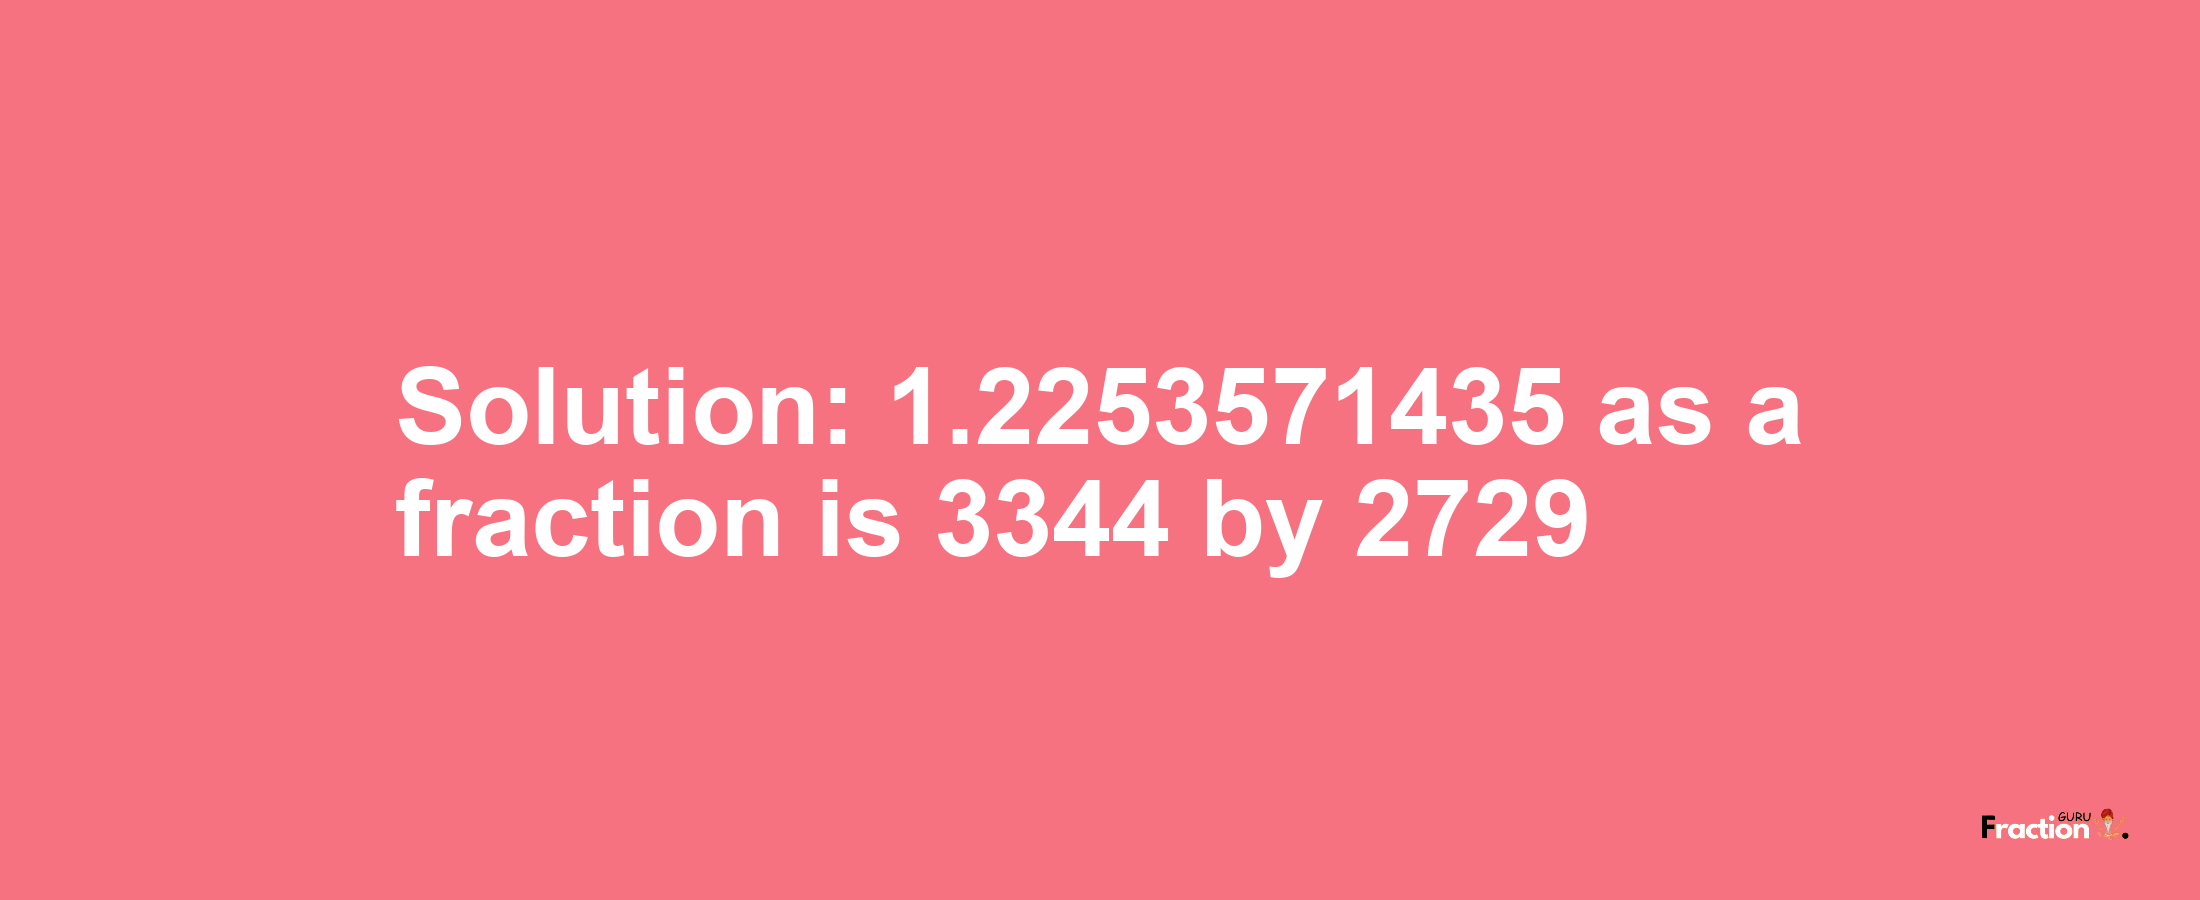 Solution:1.2253571435 as a fraction is 3344/2729